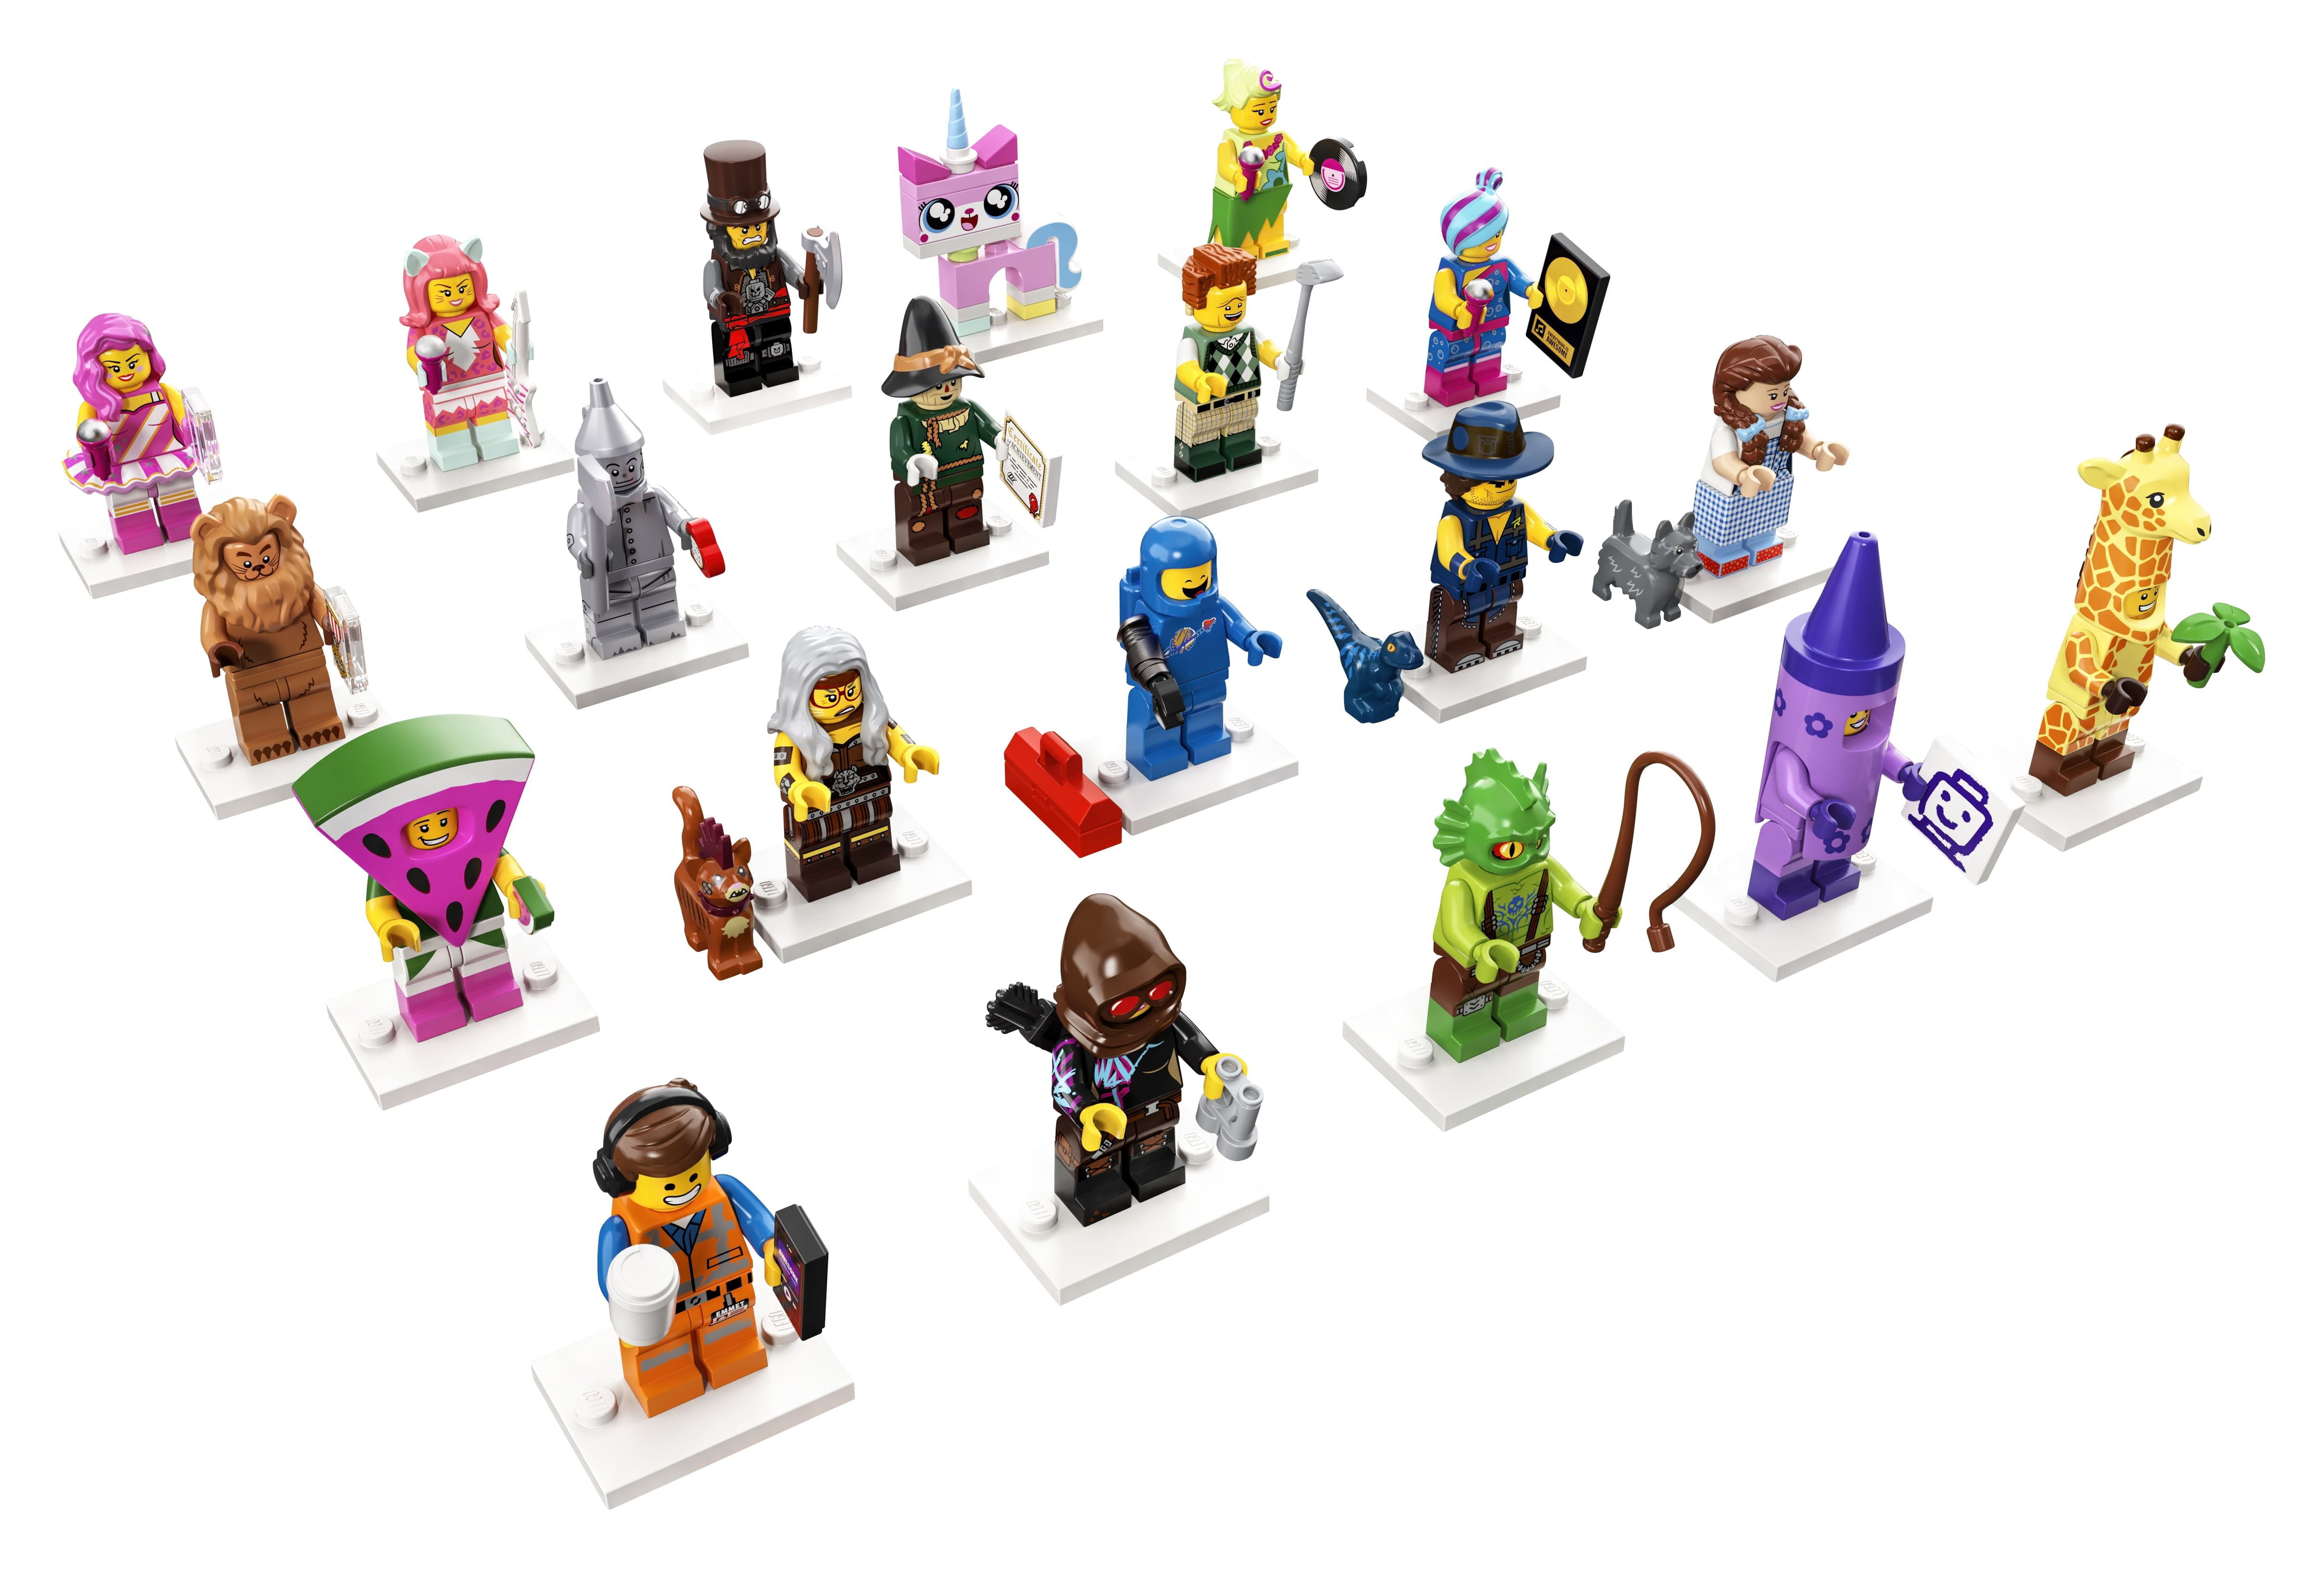 LEGO MARVEL Minifigures Collection (February Update)